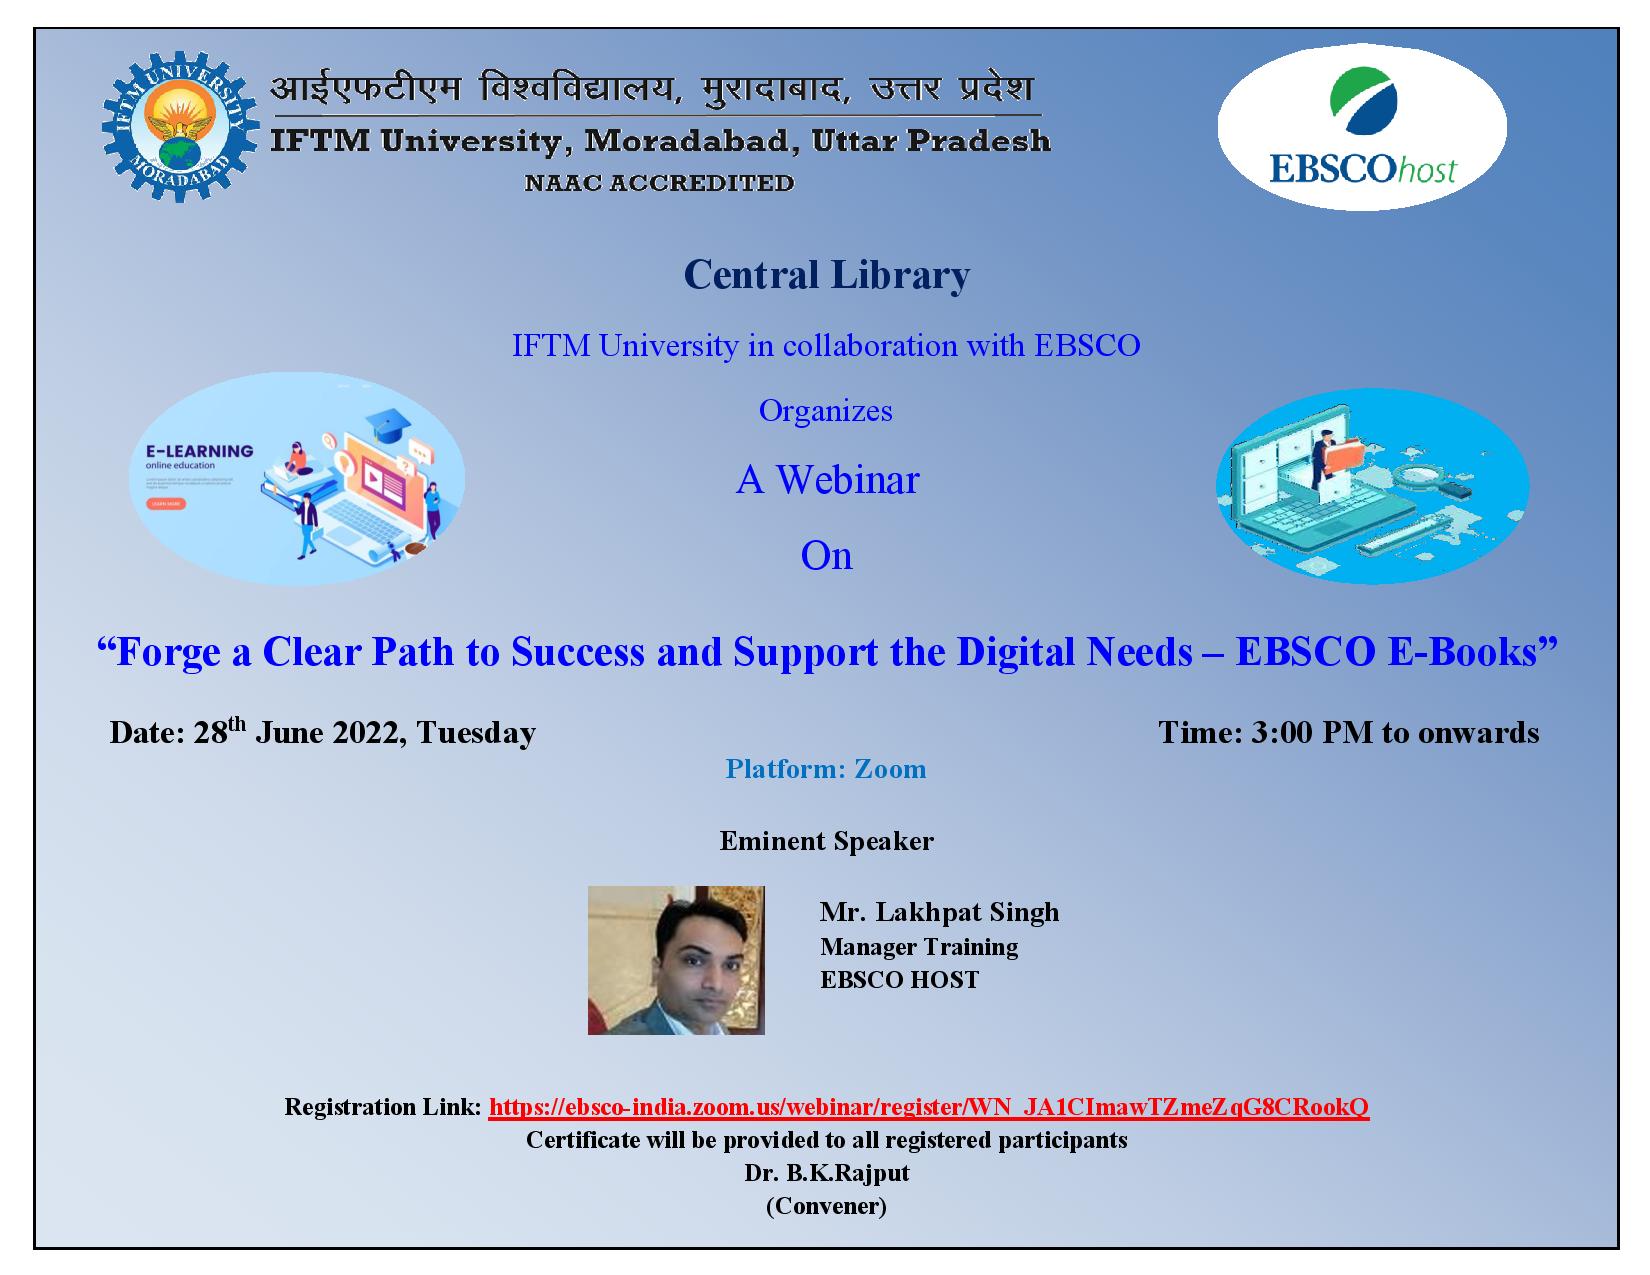 A Webinar on Forge a Clear Path to Success and Support the Digital Needs – EBSCO E-Books